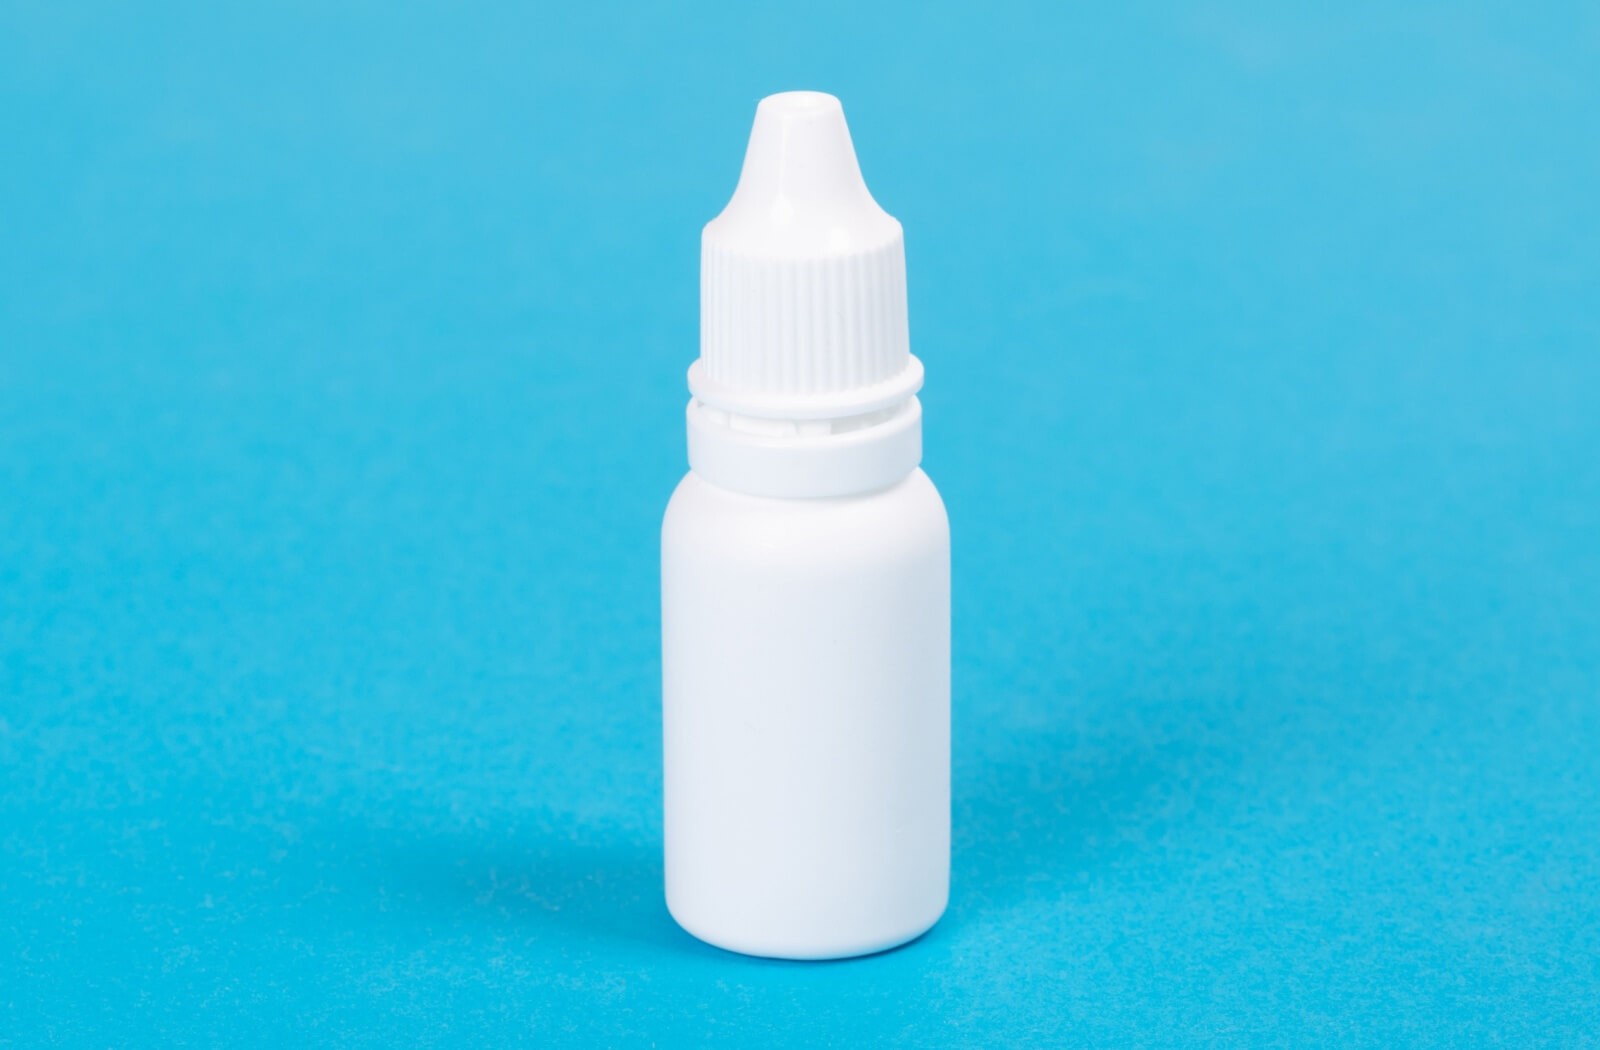 A close-up of a bottle of eyedrops against a blue background.